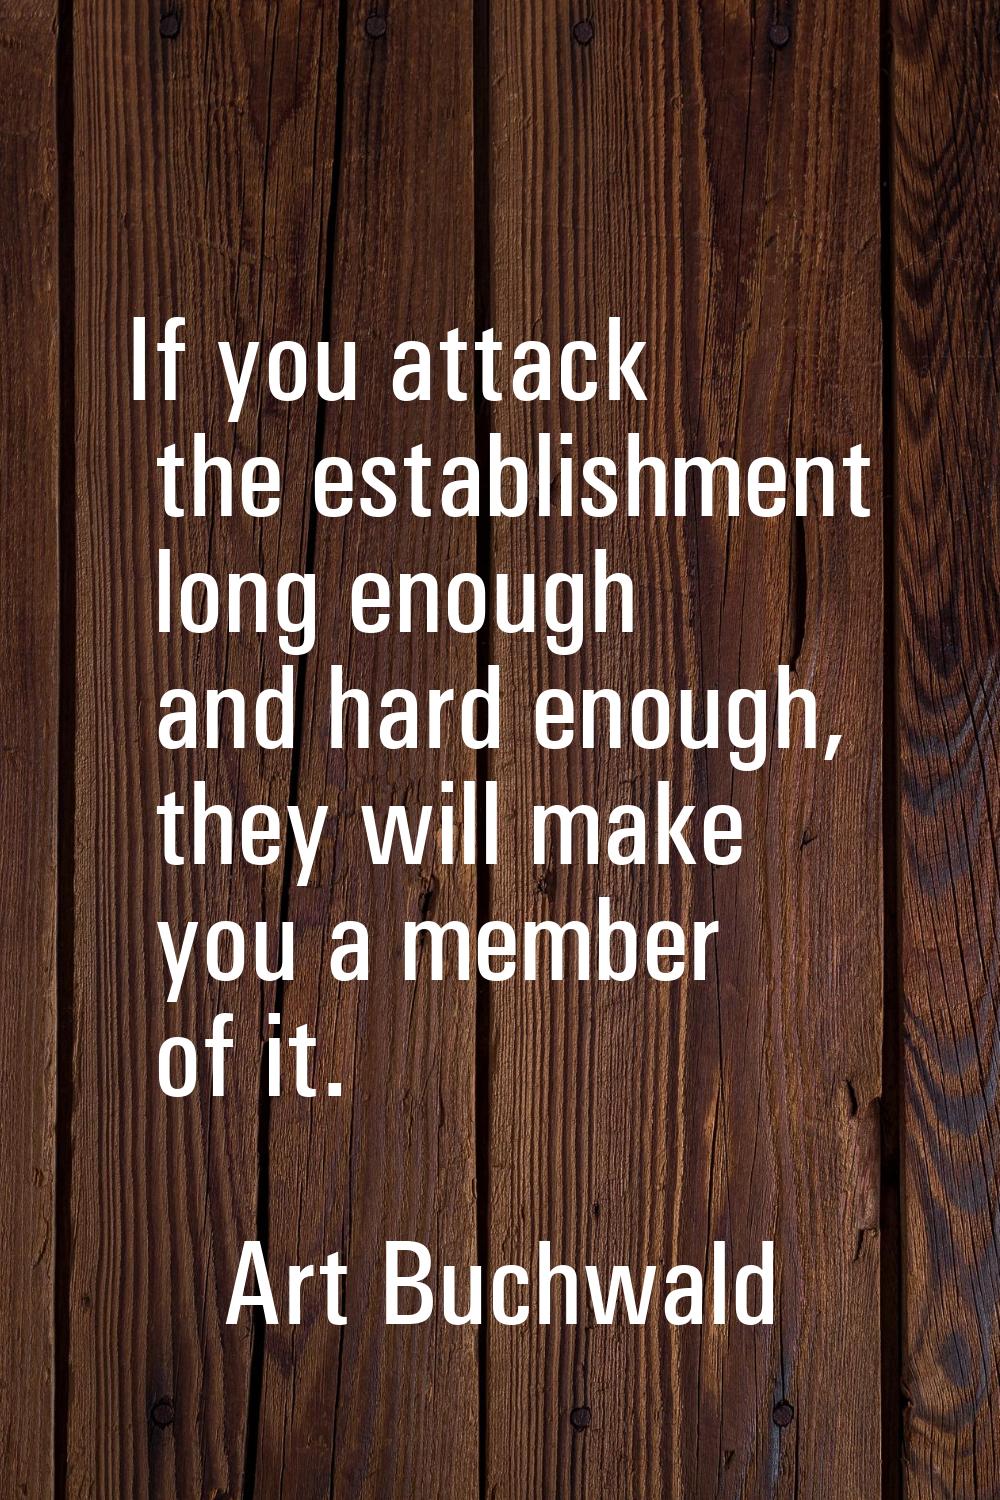 If you attack the establishment long enough and hard enough, they will make you a member of it.